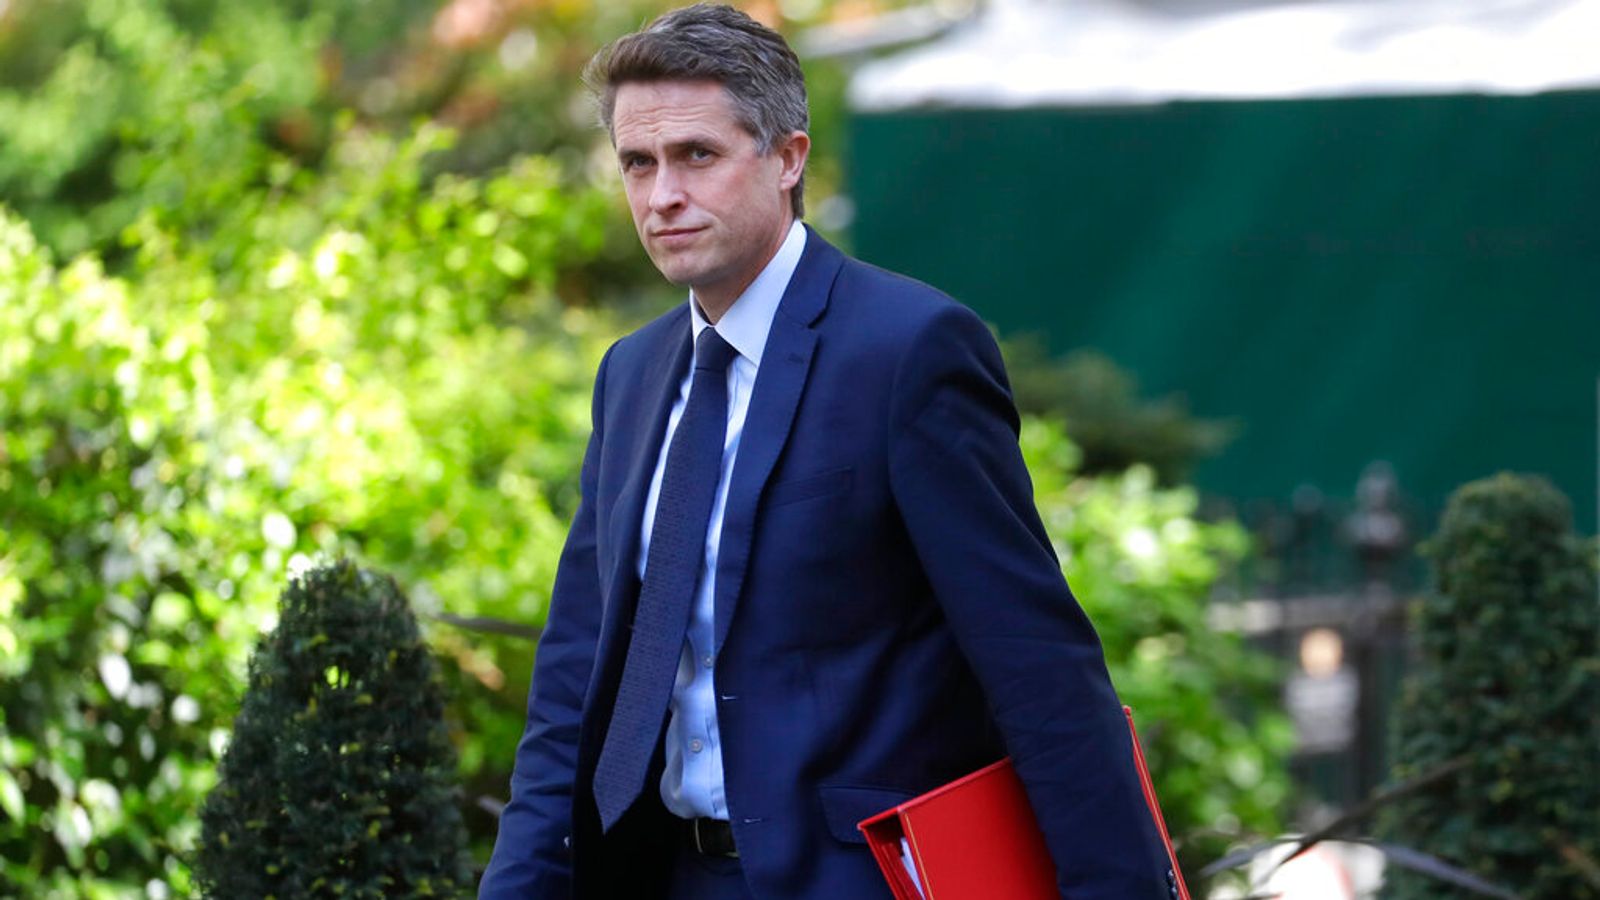 Gavin Williamson strongly rejects telling civil servant to 'slit your throat'